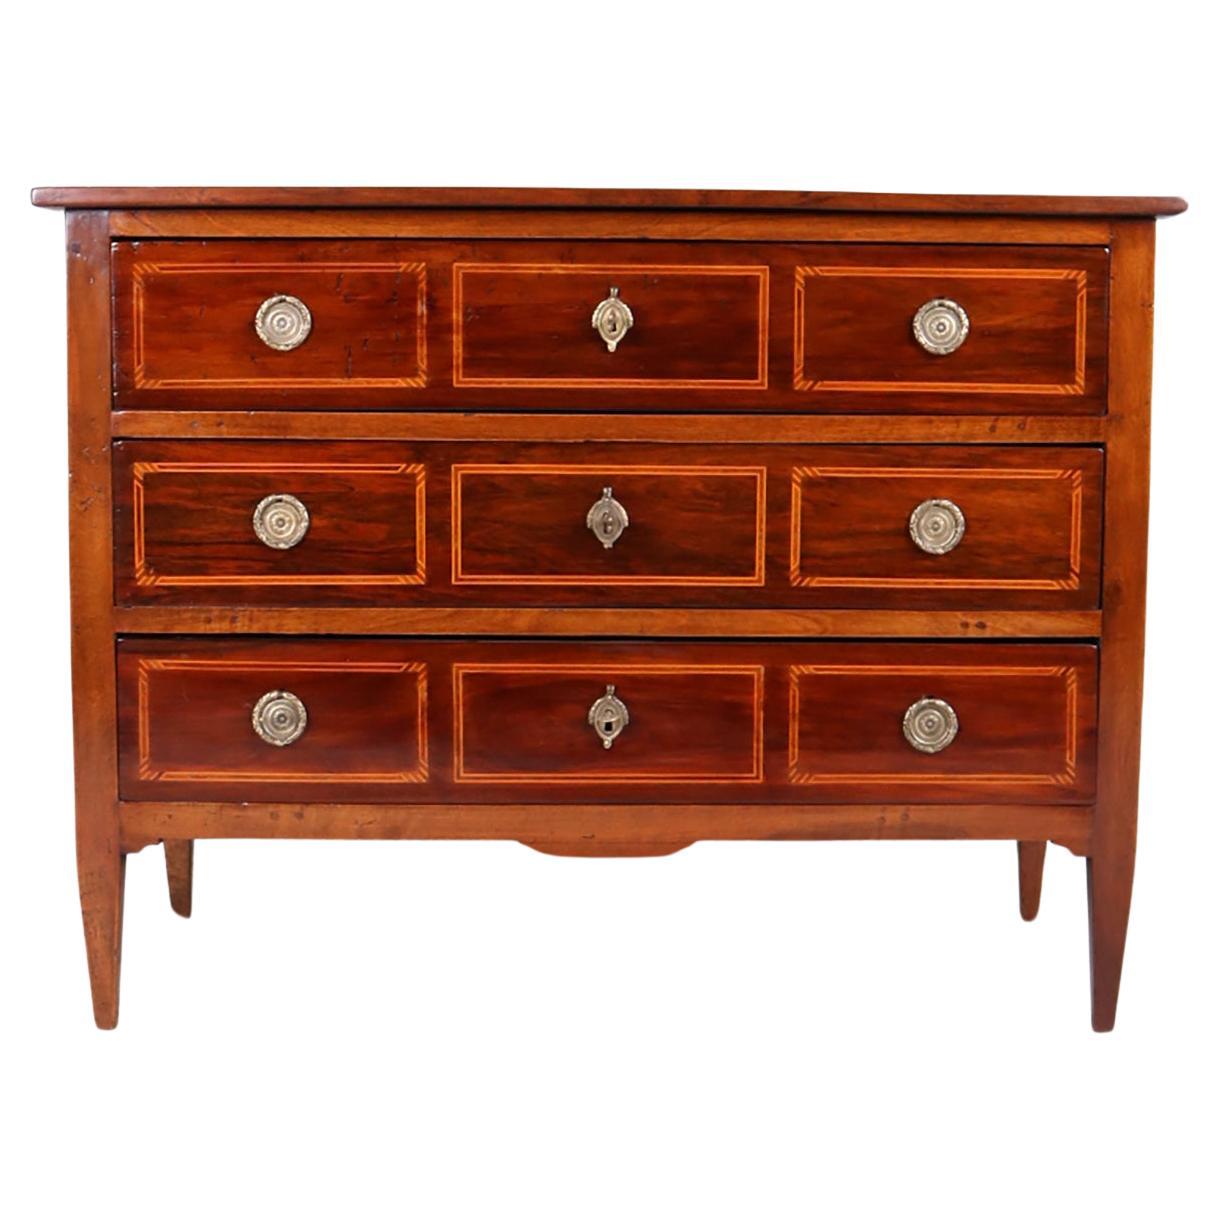 Louis XVI Chest of drawers from early 19th century


Antique chest of drawers from early XIX century.
The body of the chest of drawers is made of solid walnut. Decorative inlays are made of light maple wood. The rectangular body rests on slanted